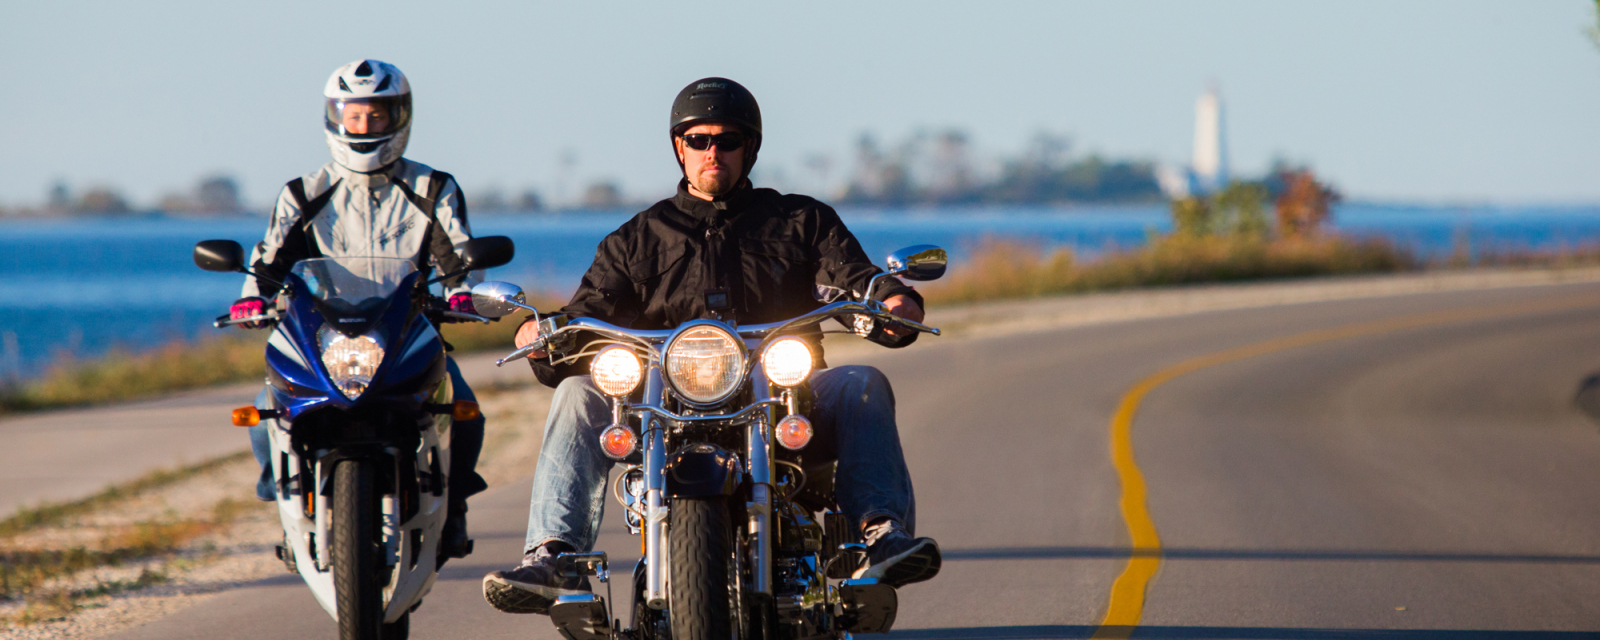 Two men on motorcycle tour along the shoreline